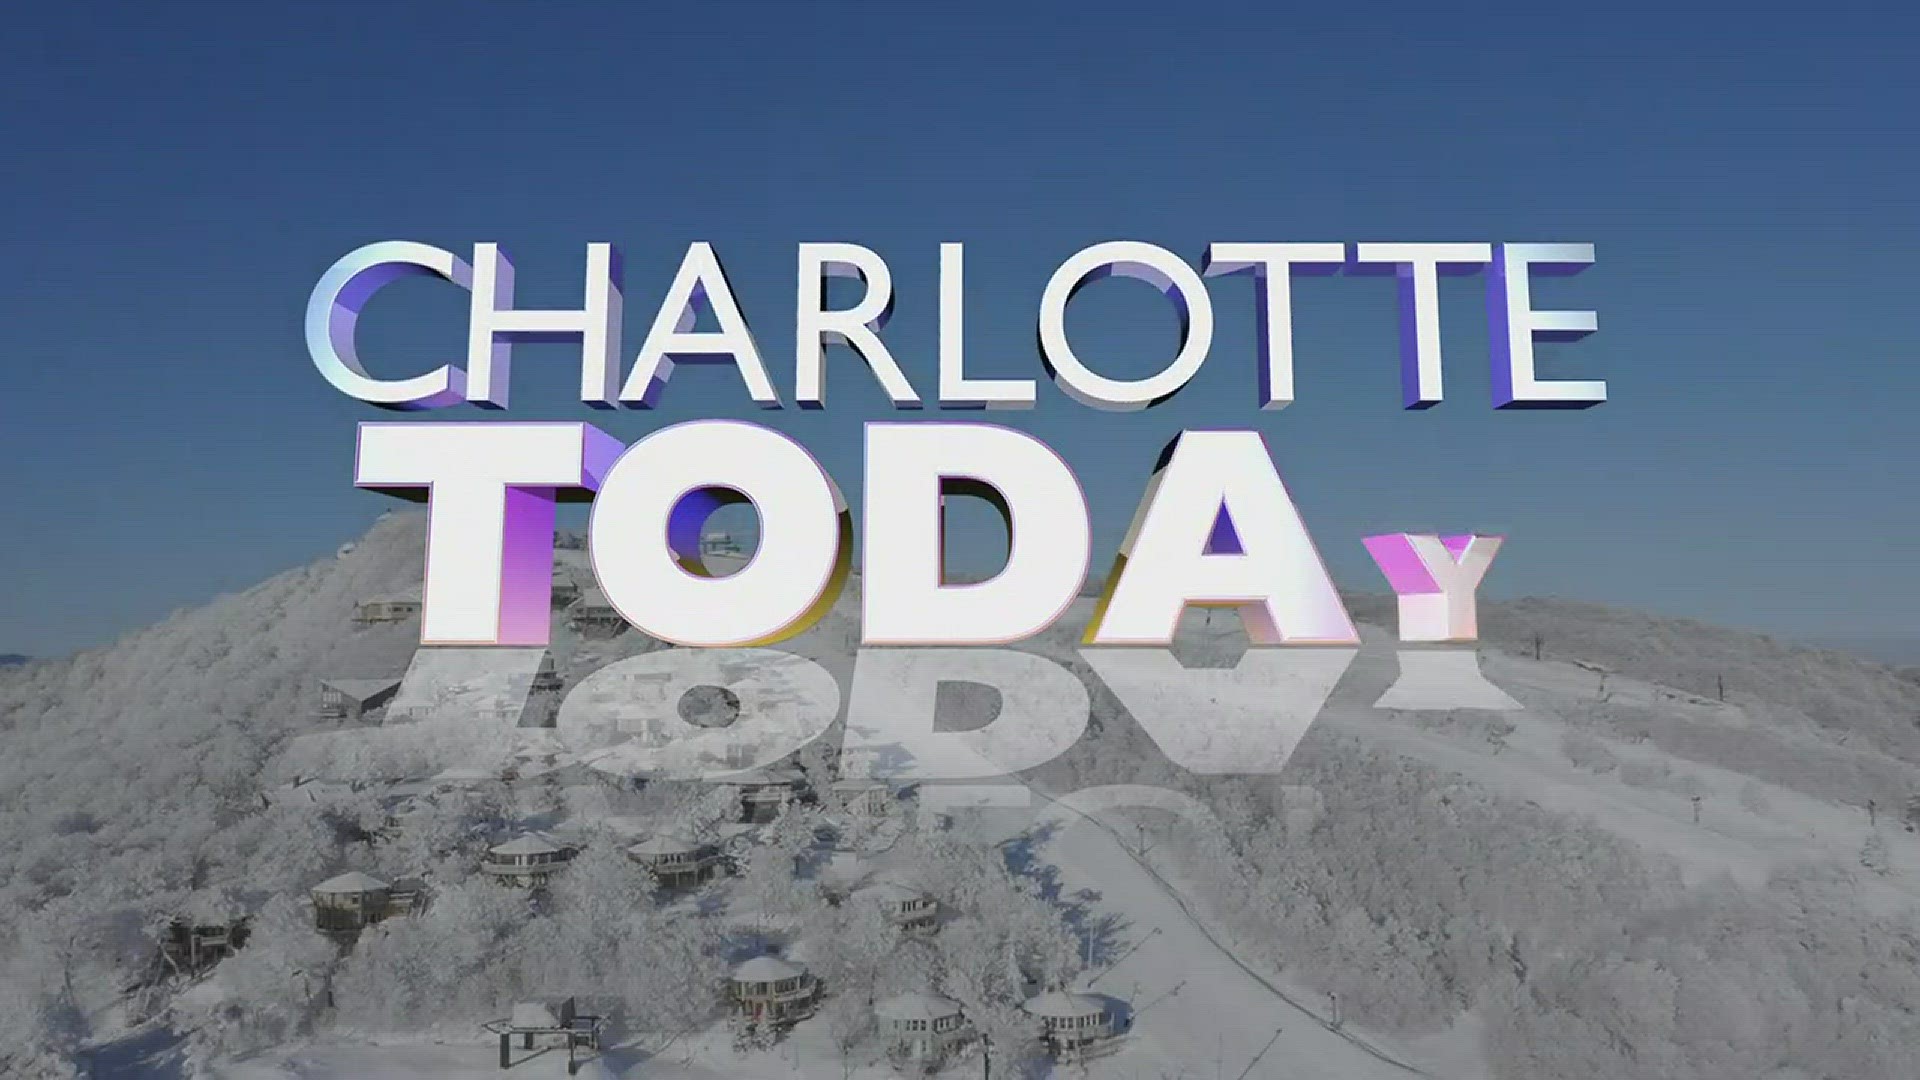 The Charlotte Today crew took a day trip the Beech Mountain